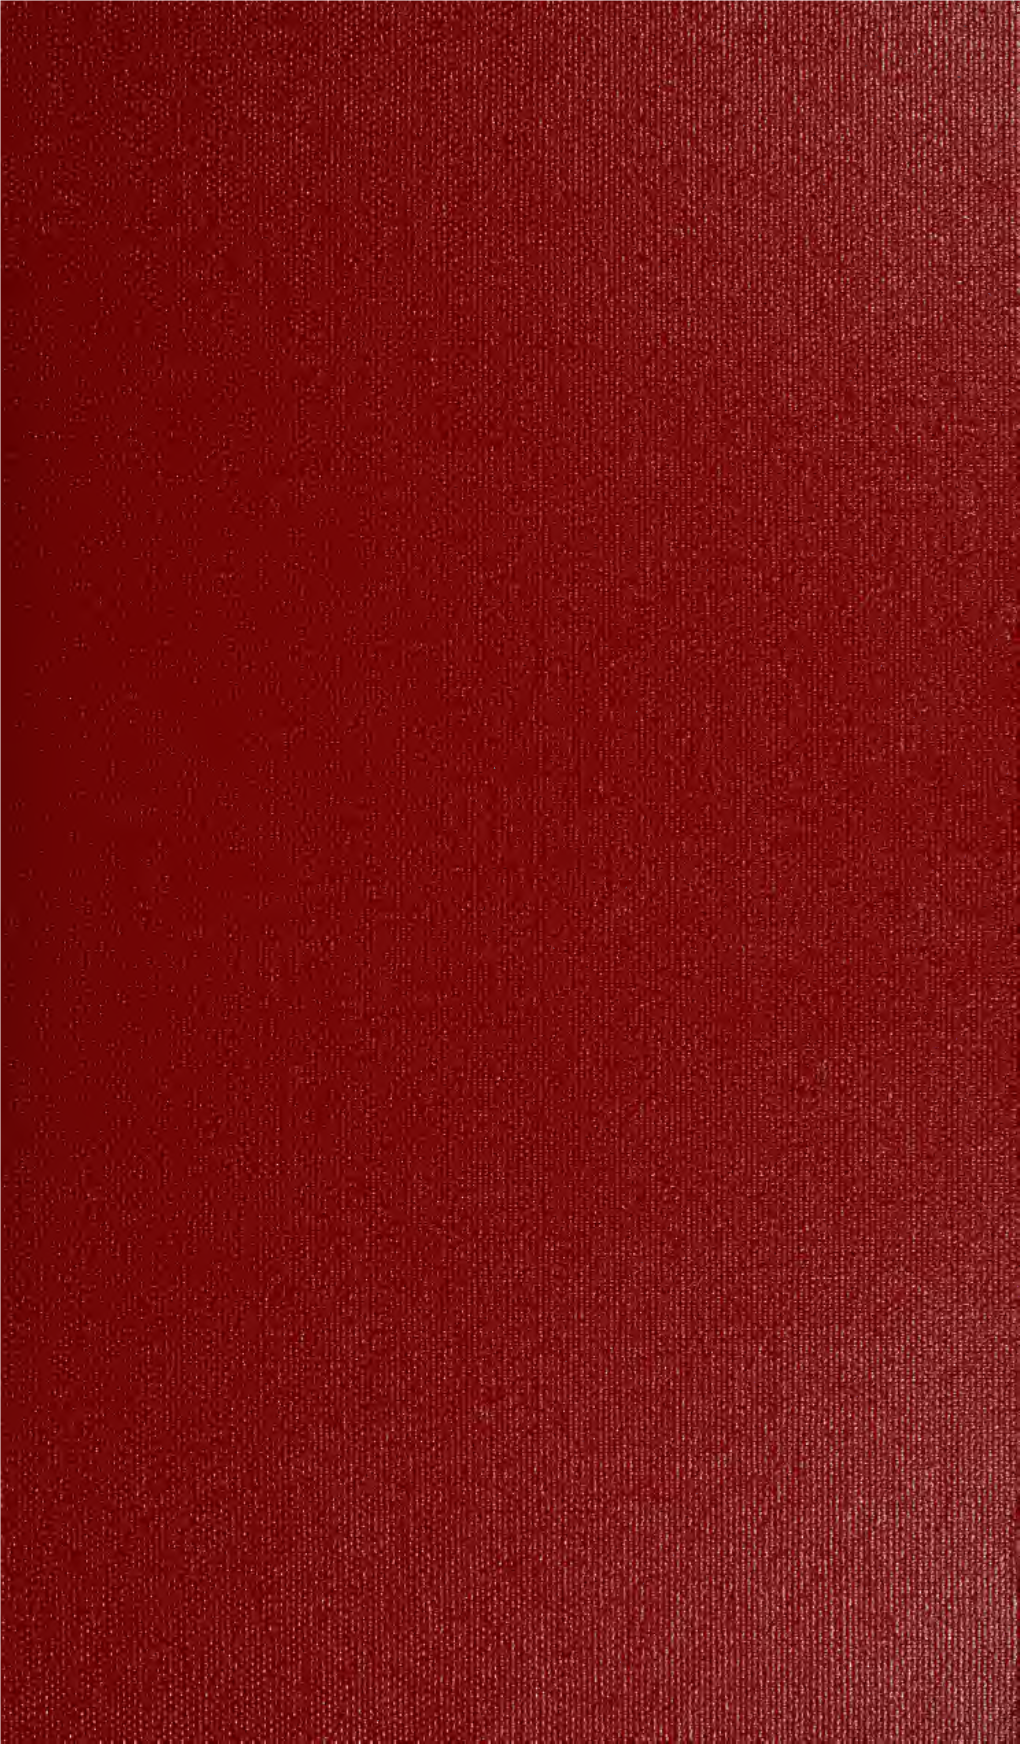 Leather Manufacture : a Treatise on the Practical Workings of the Leather Manufacture : Including Oil Shoe Grain, Imitation Goat